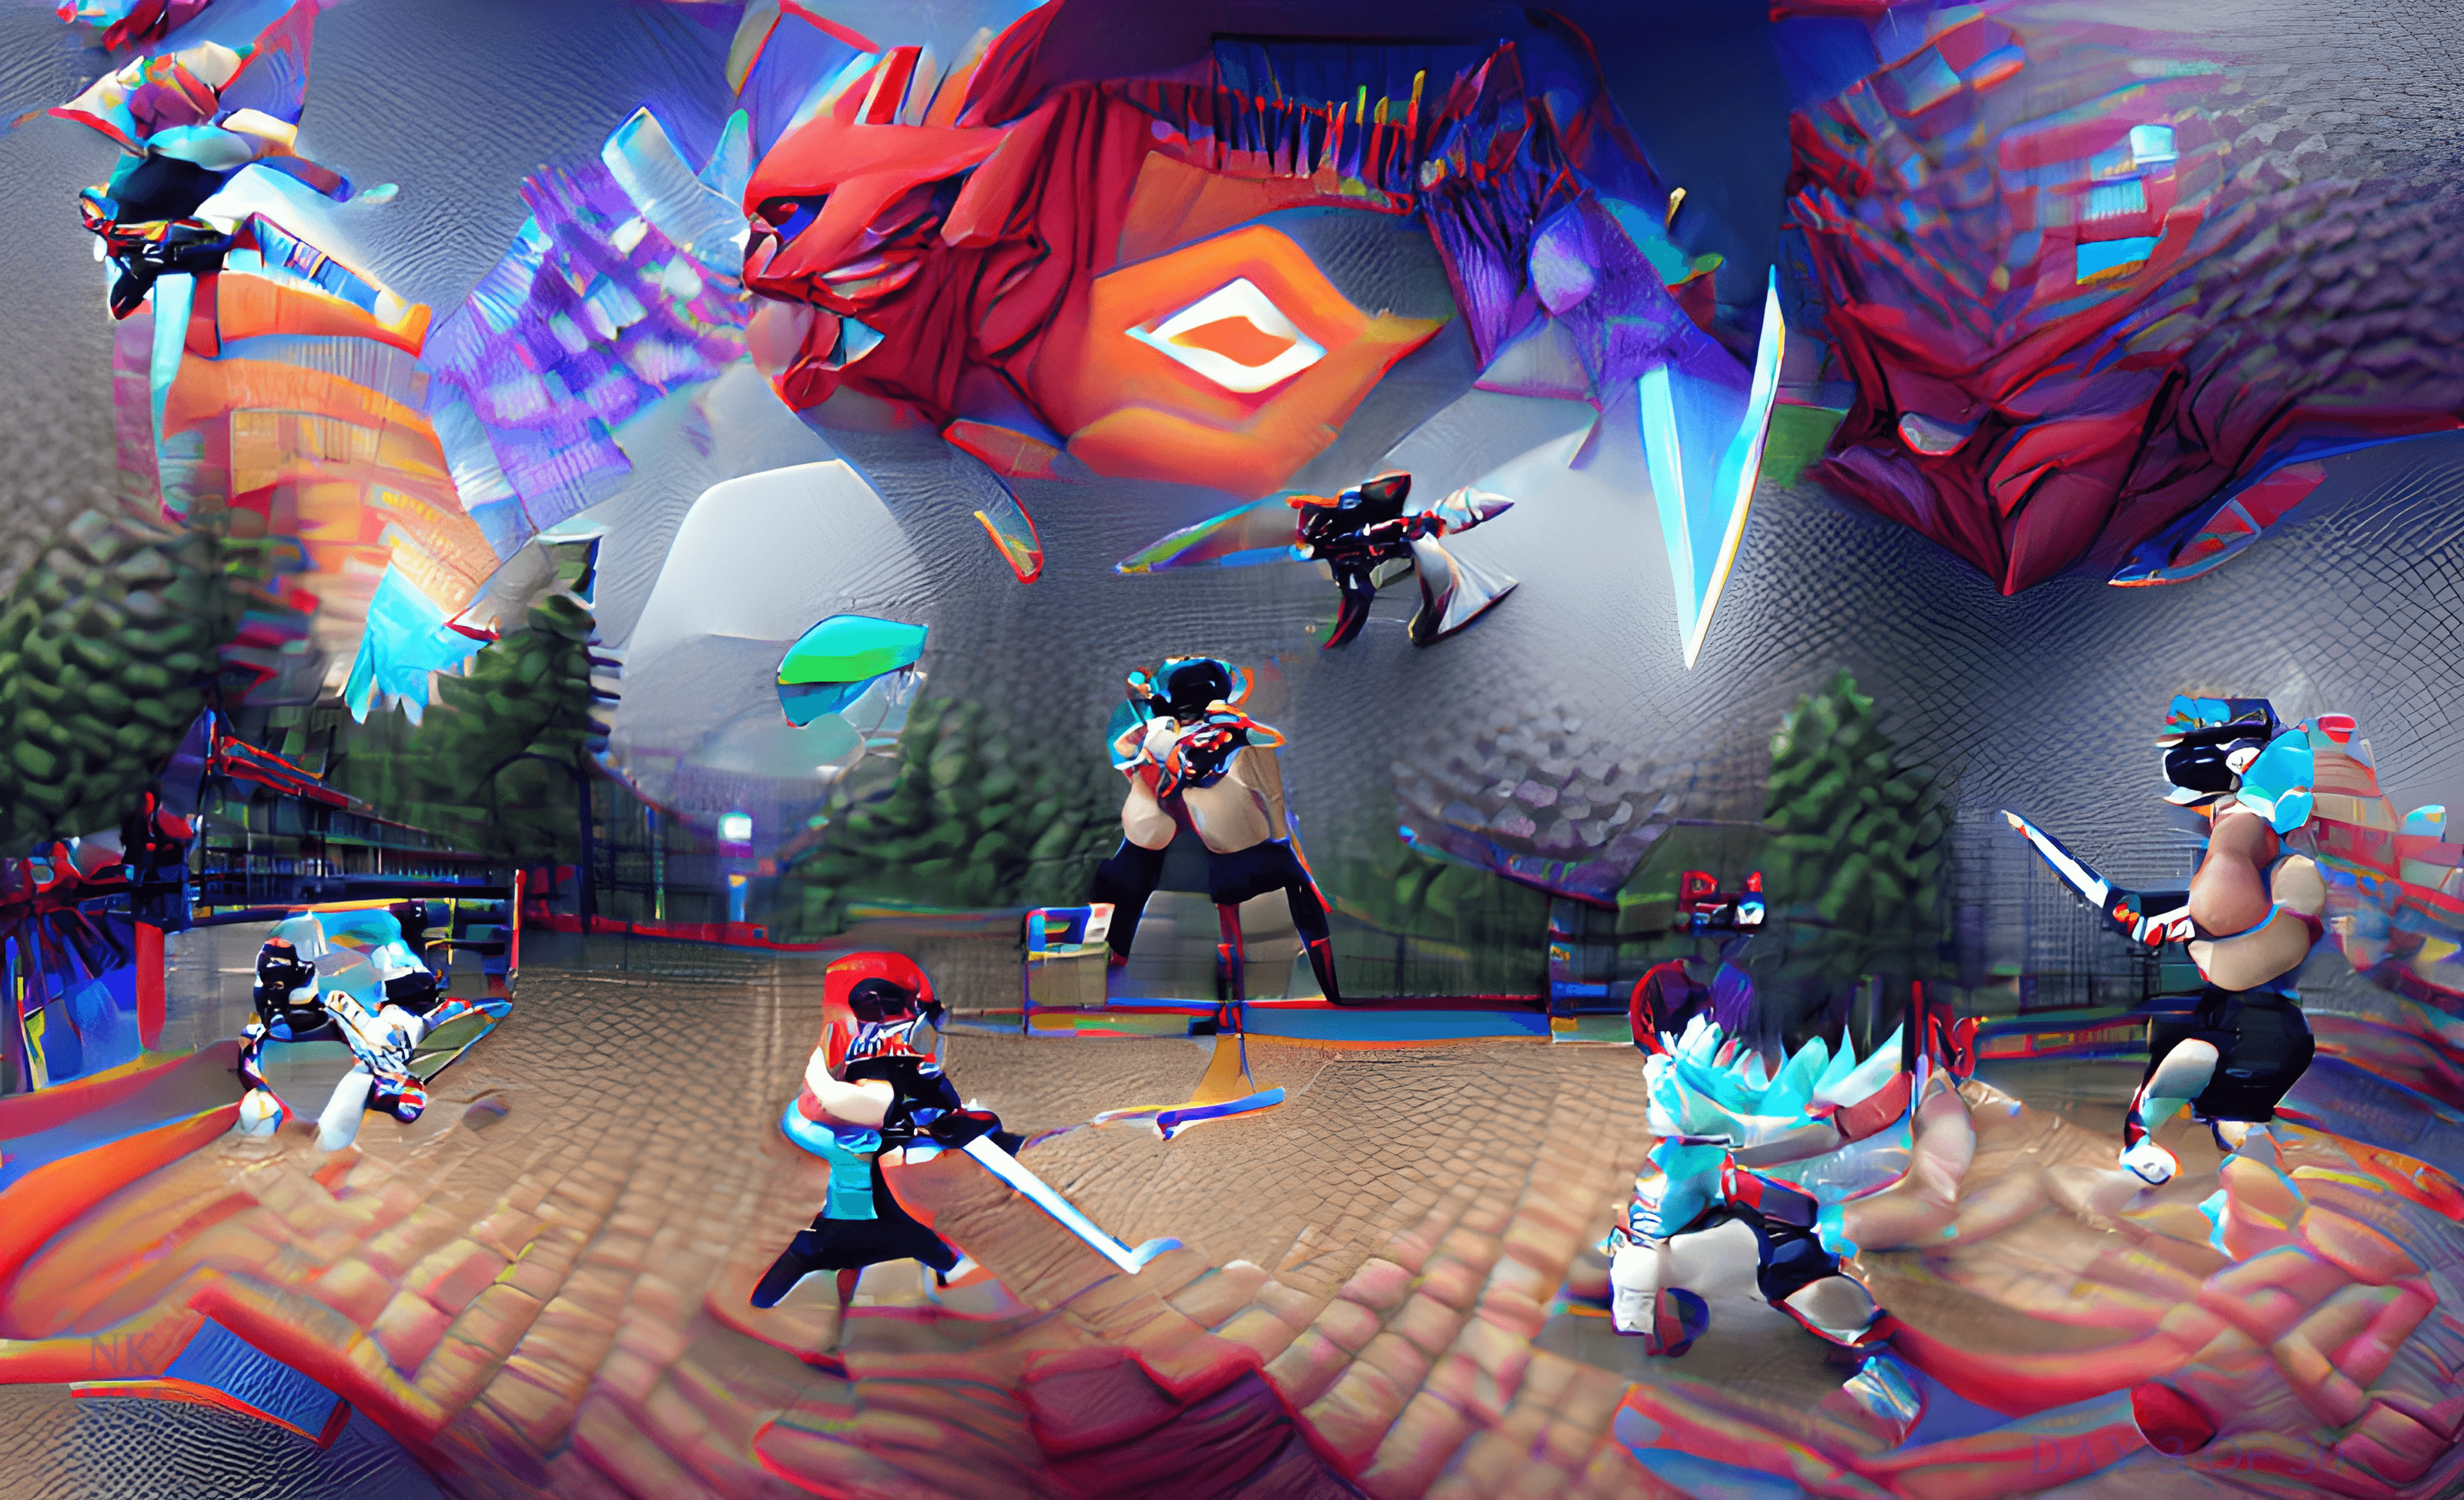 Day 3 of 30 |  PVP in the Metaverse #30DaysOfMetaverse